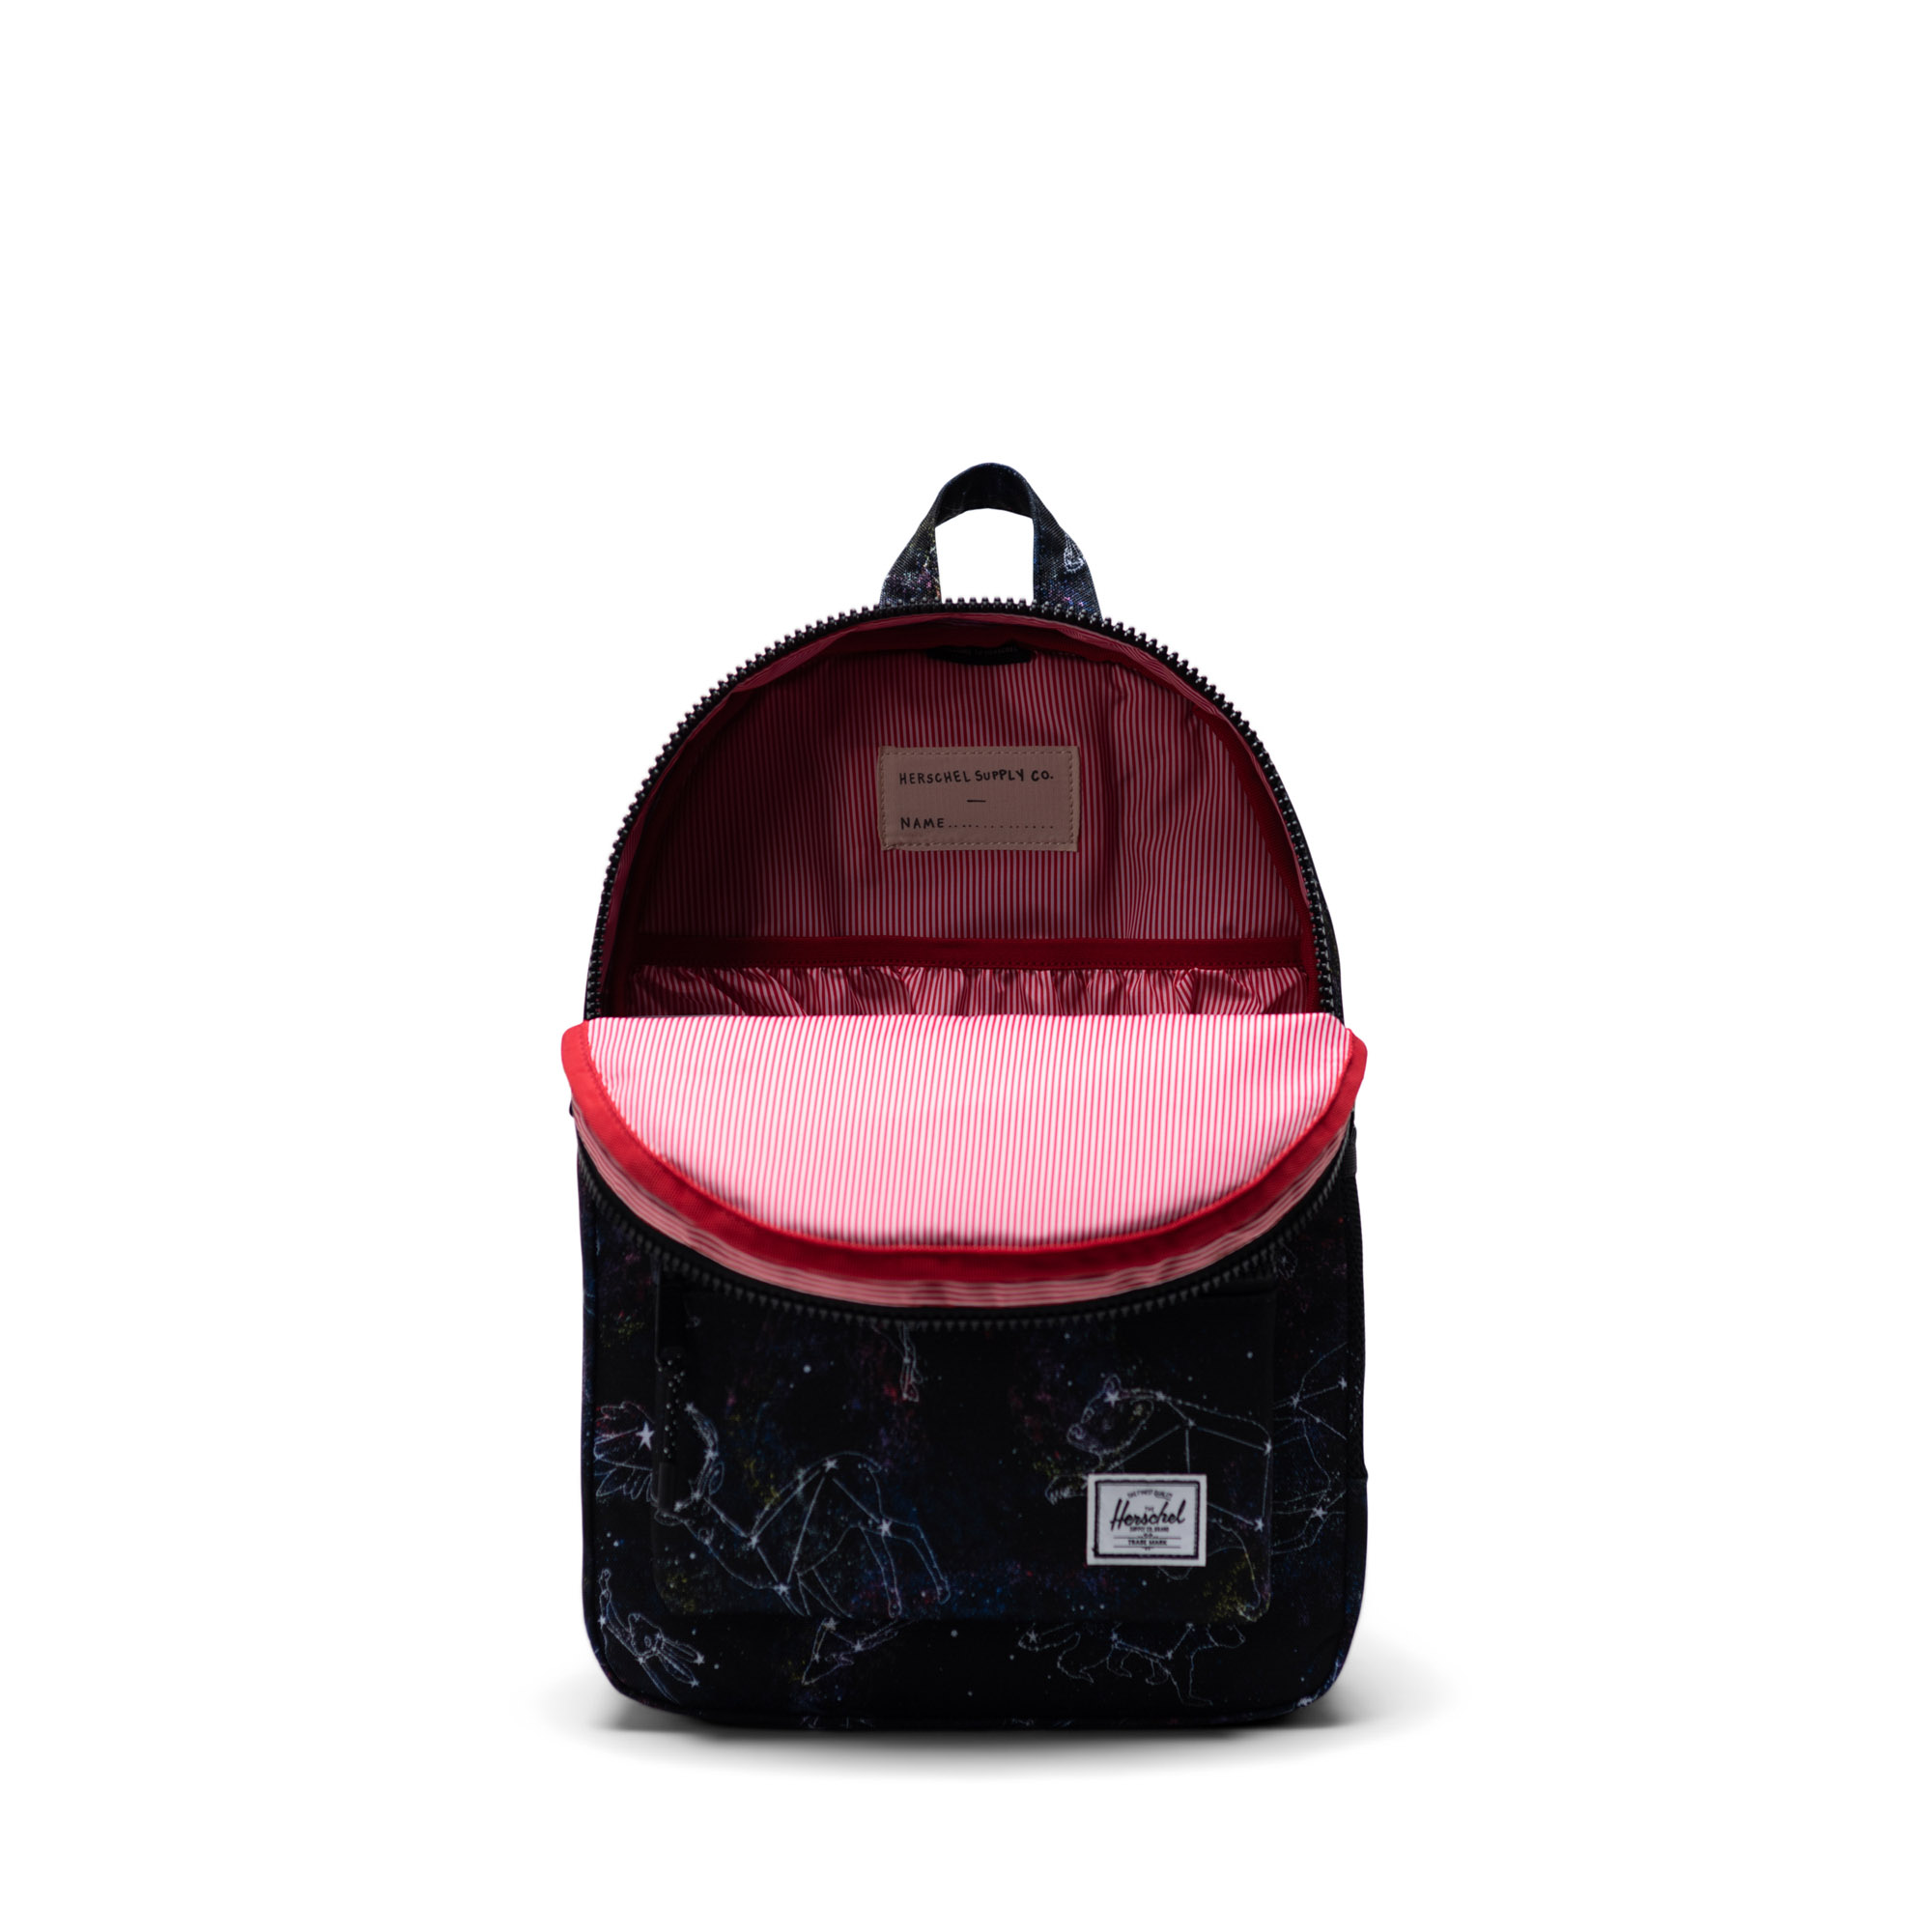 Heritage Backpack Youth 16L